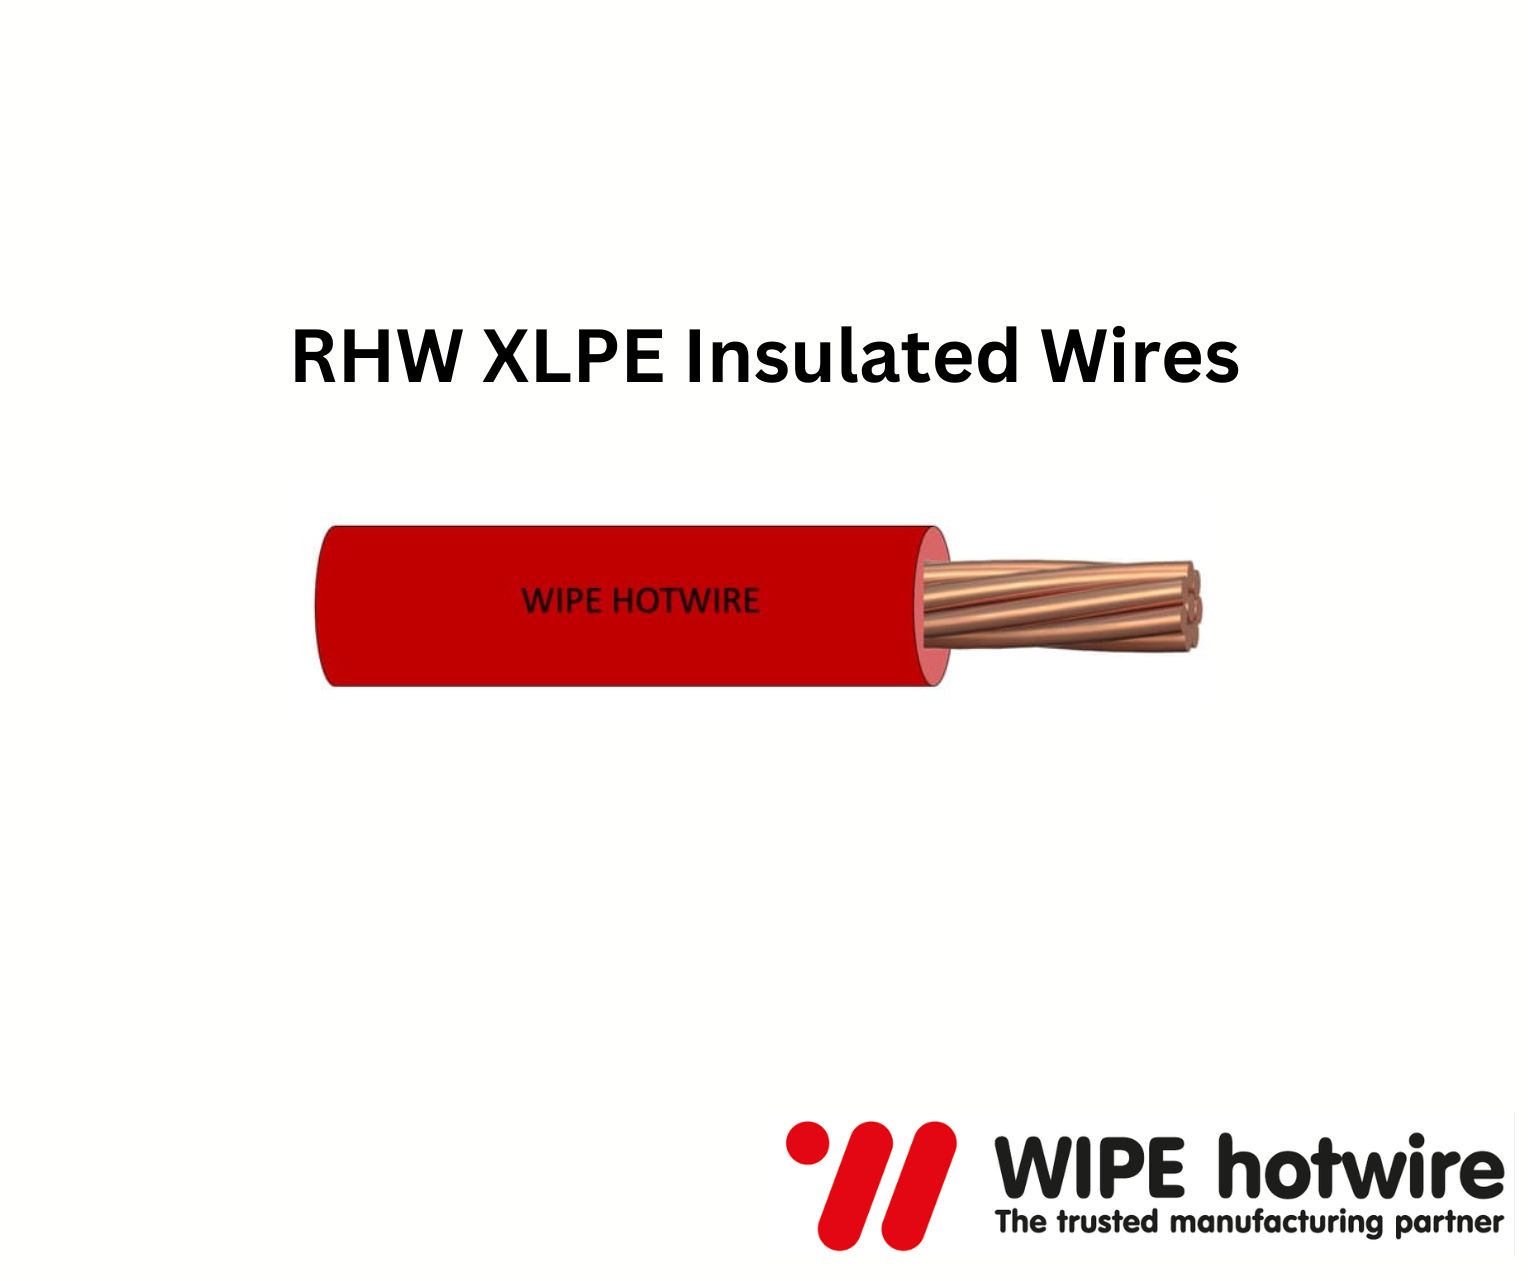 RHW XLPE Insulated Wires